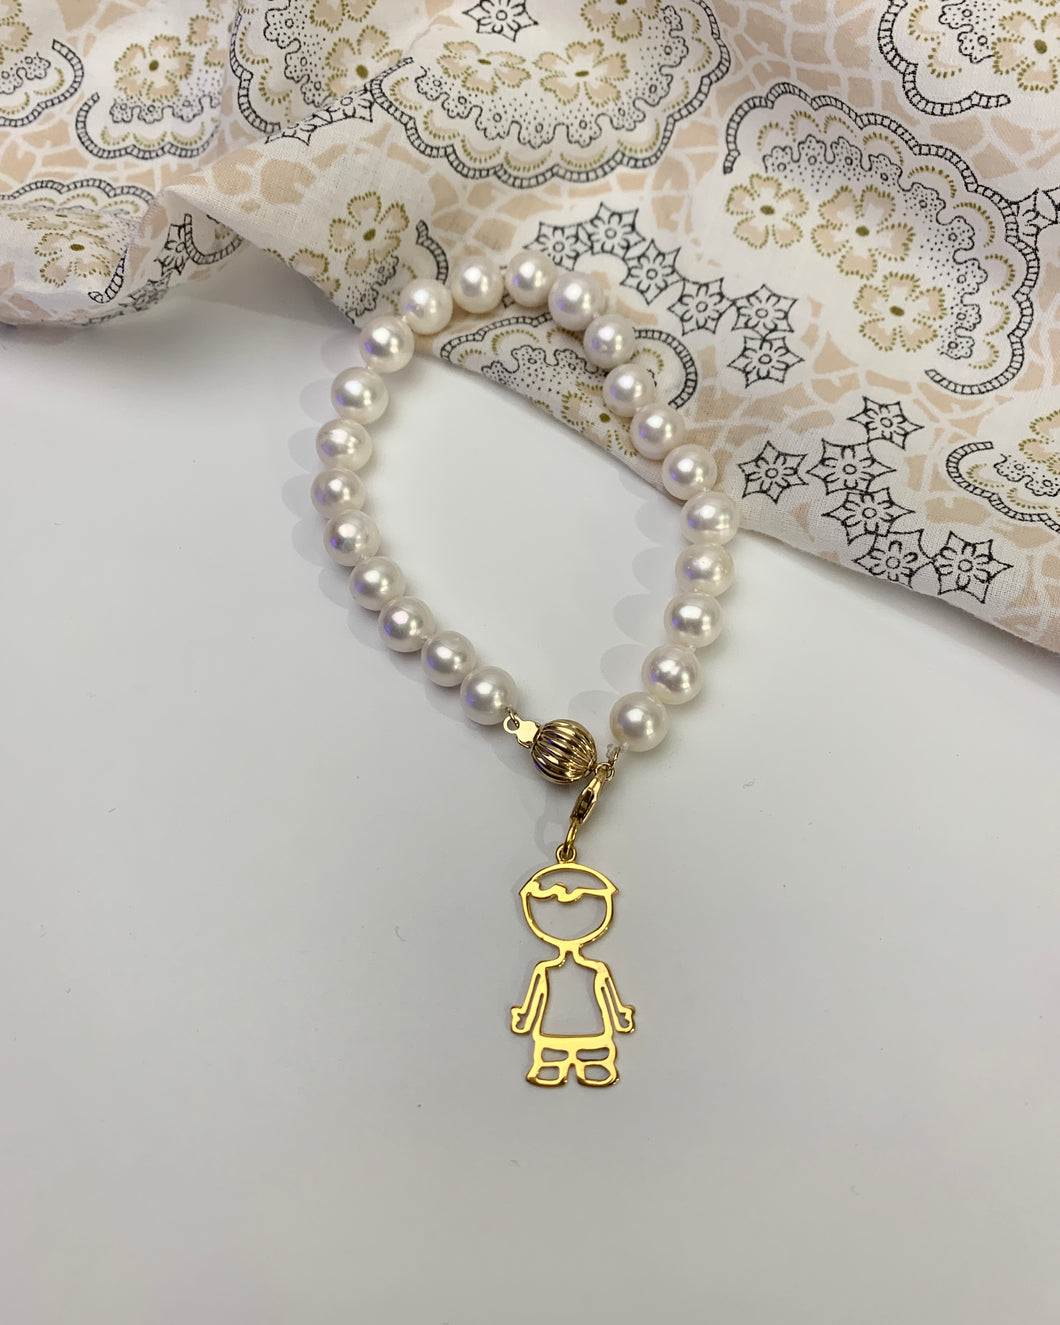 22 pieces of freshwater white pearls with a gold boy charm. Also with a ball clasp as its lock. 